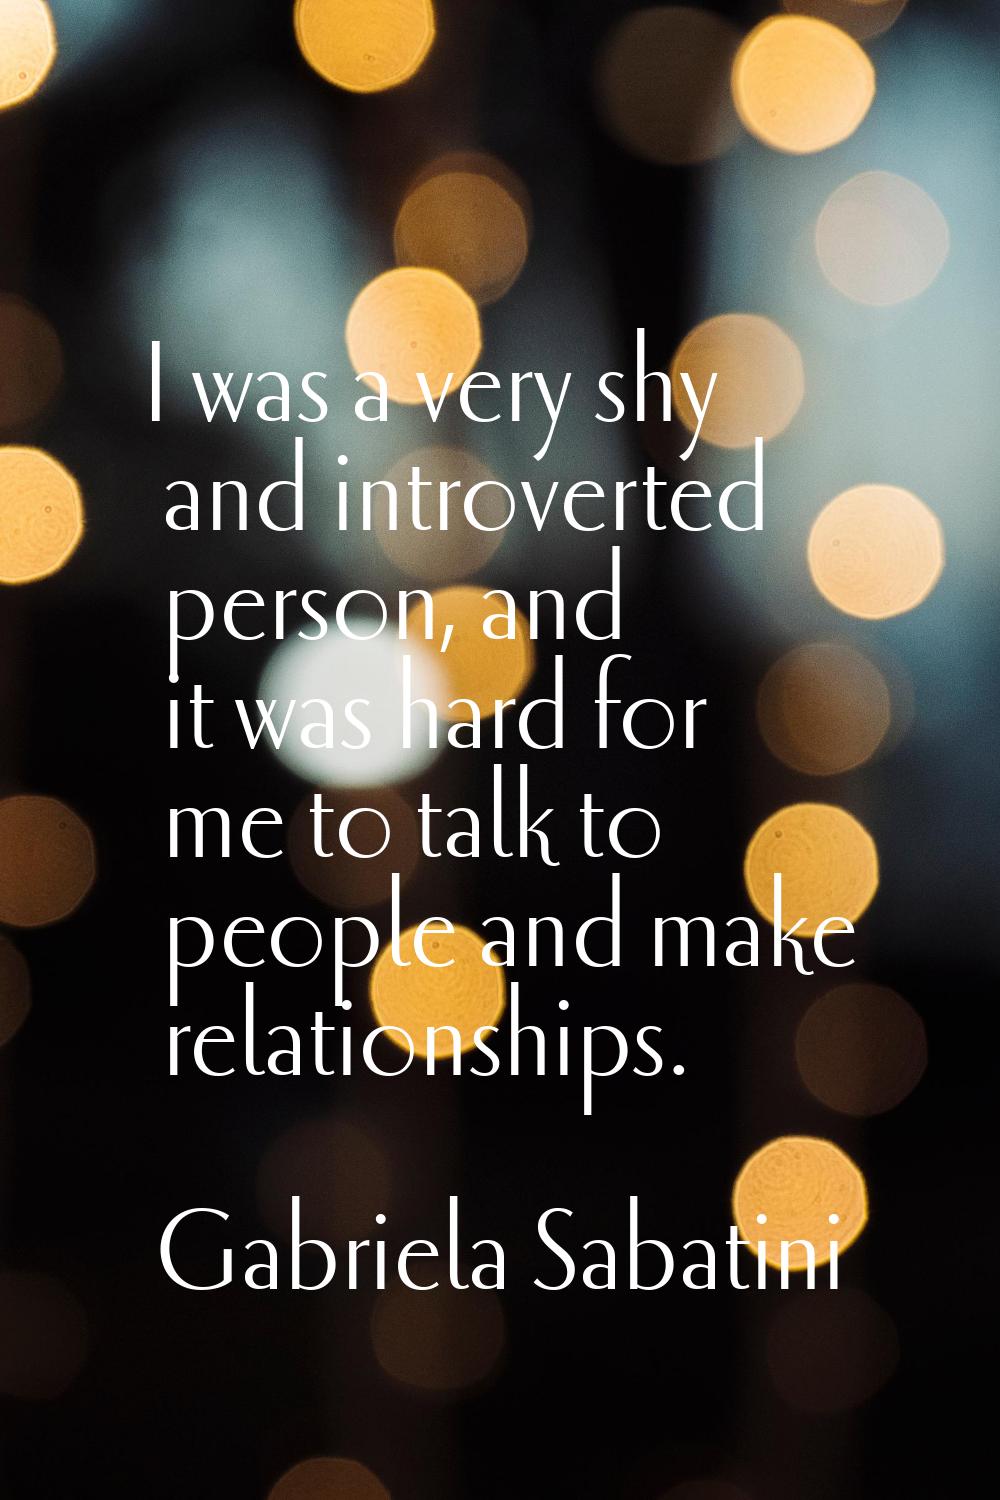 I was a very shy and introverted person, and it was hard for me to talk to people and make relation